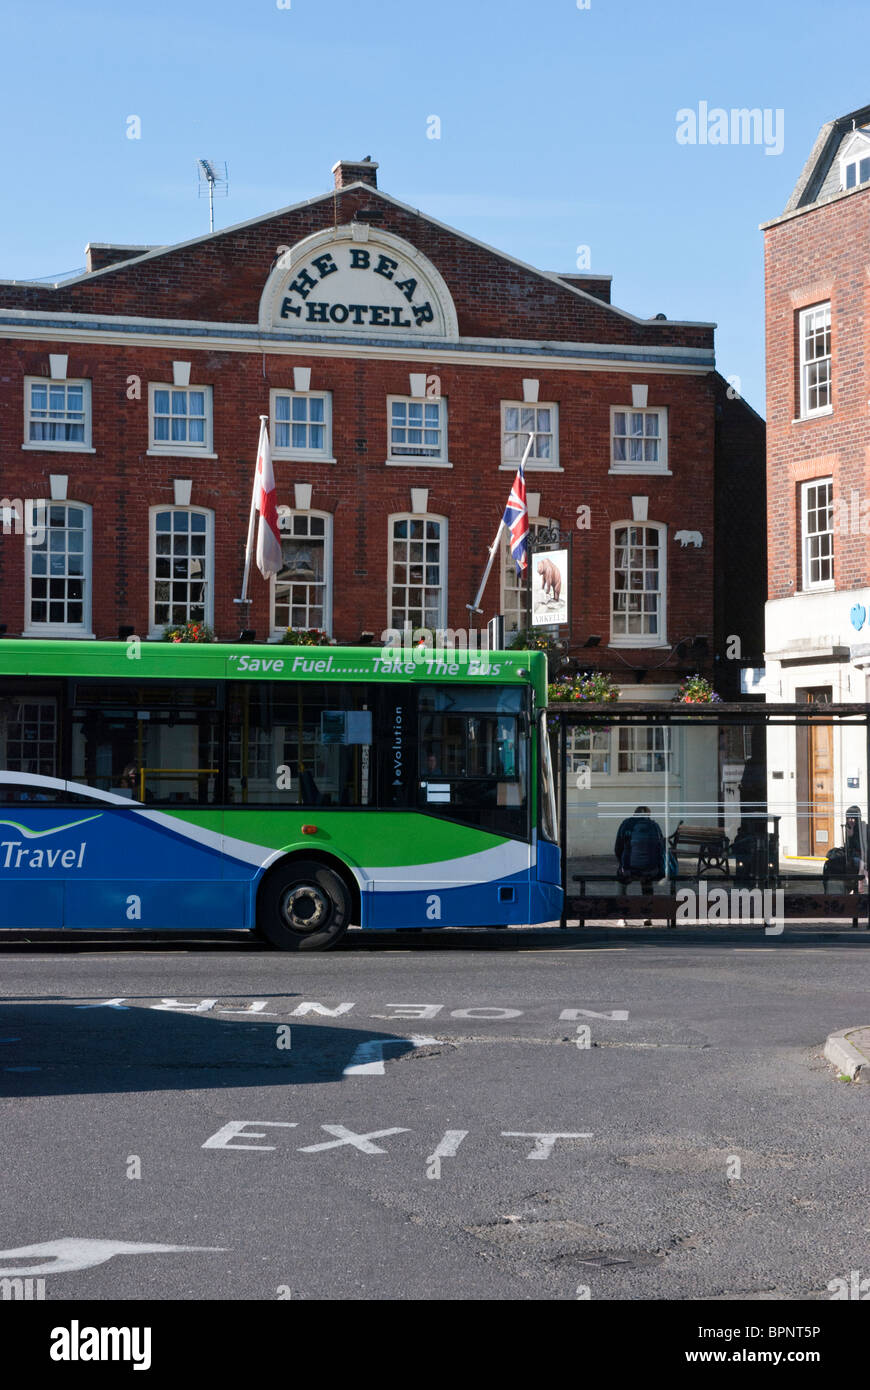 A bus belonging to Thames Travel sits in front of the Bear Hotel in the historic market place in Wantage, Oxfordshire,England Stock Photo